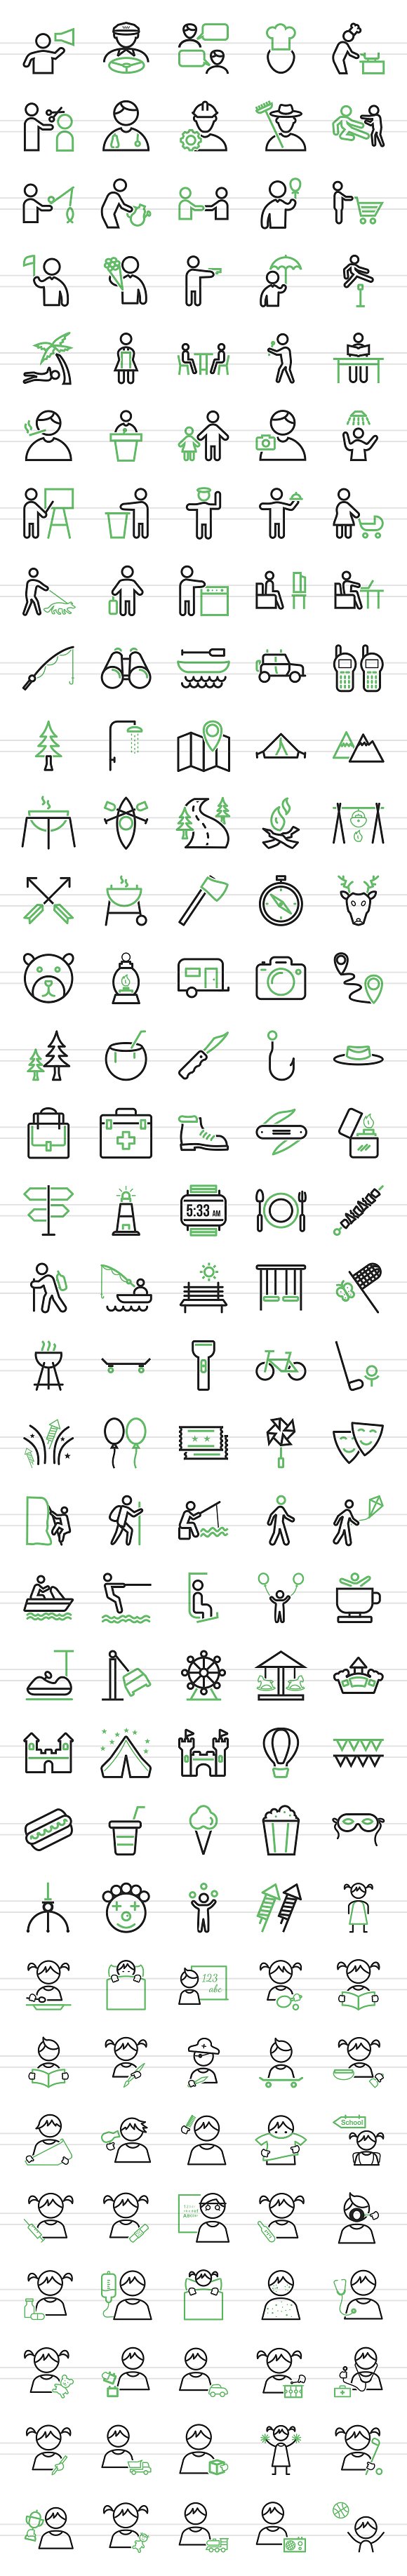 166 Activities Line Icons